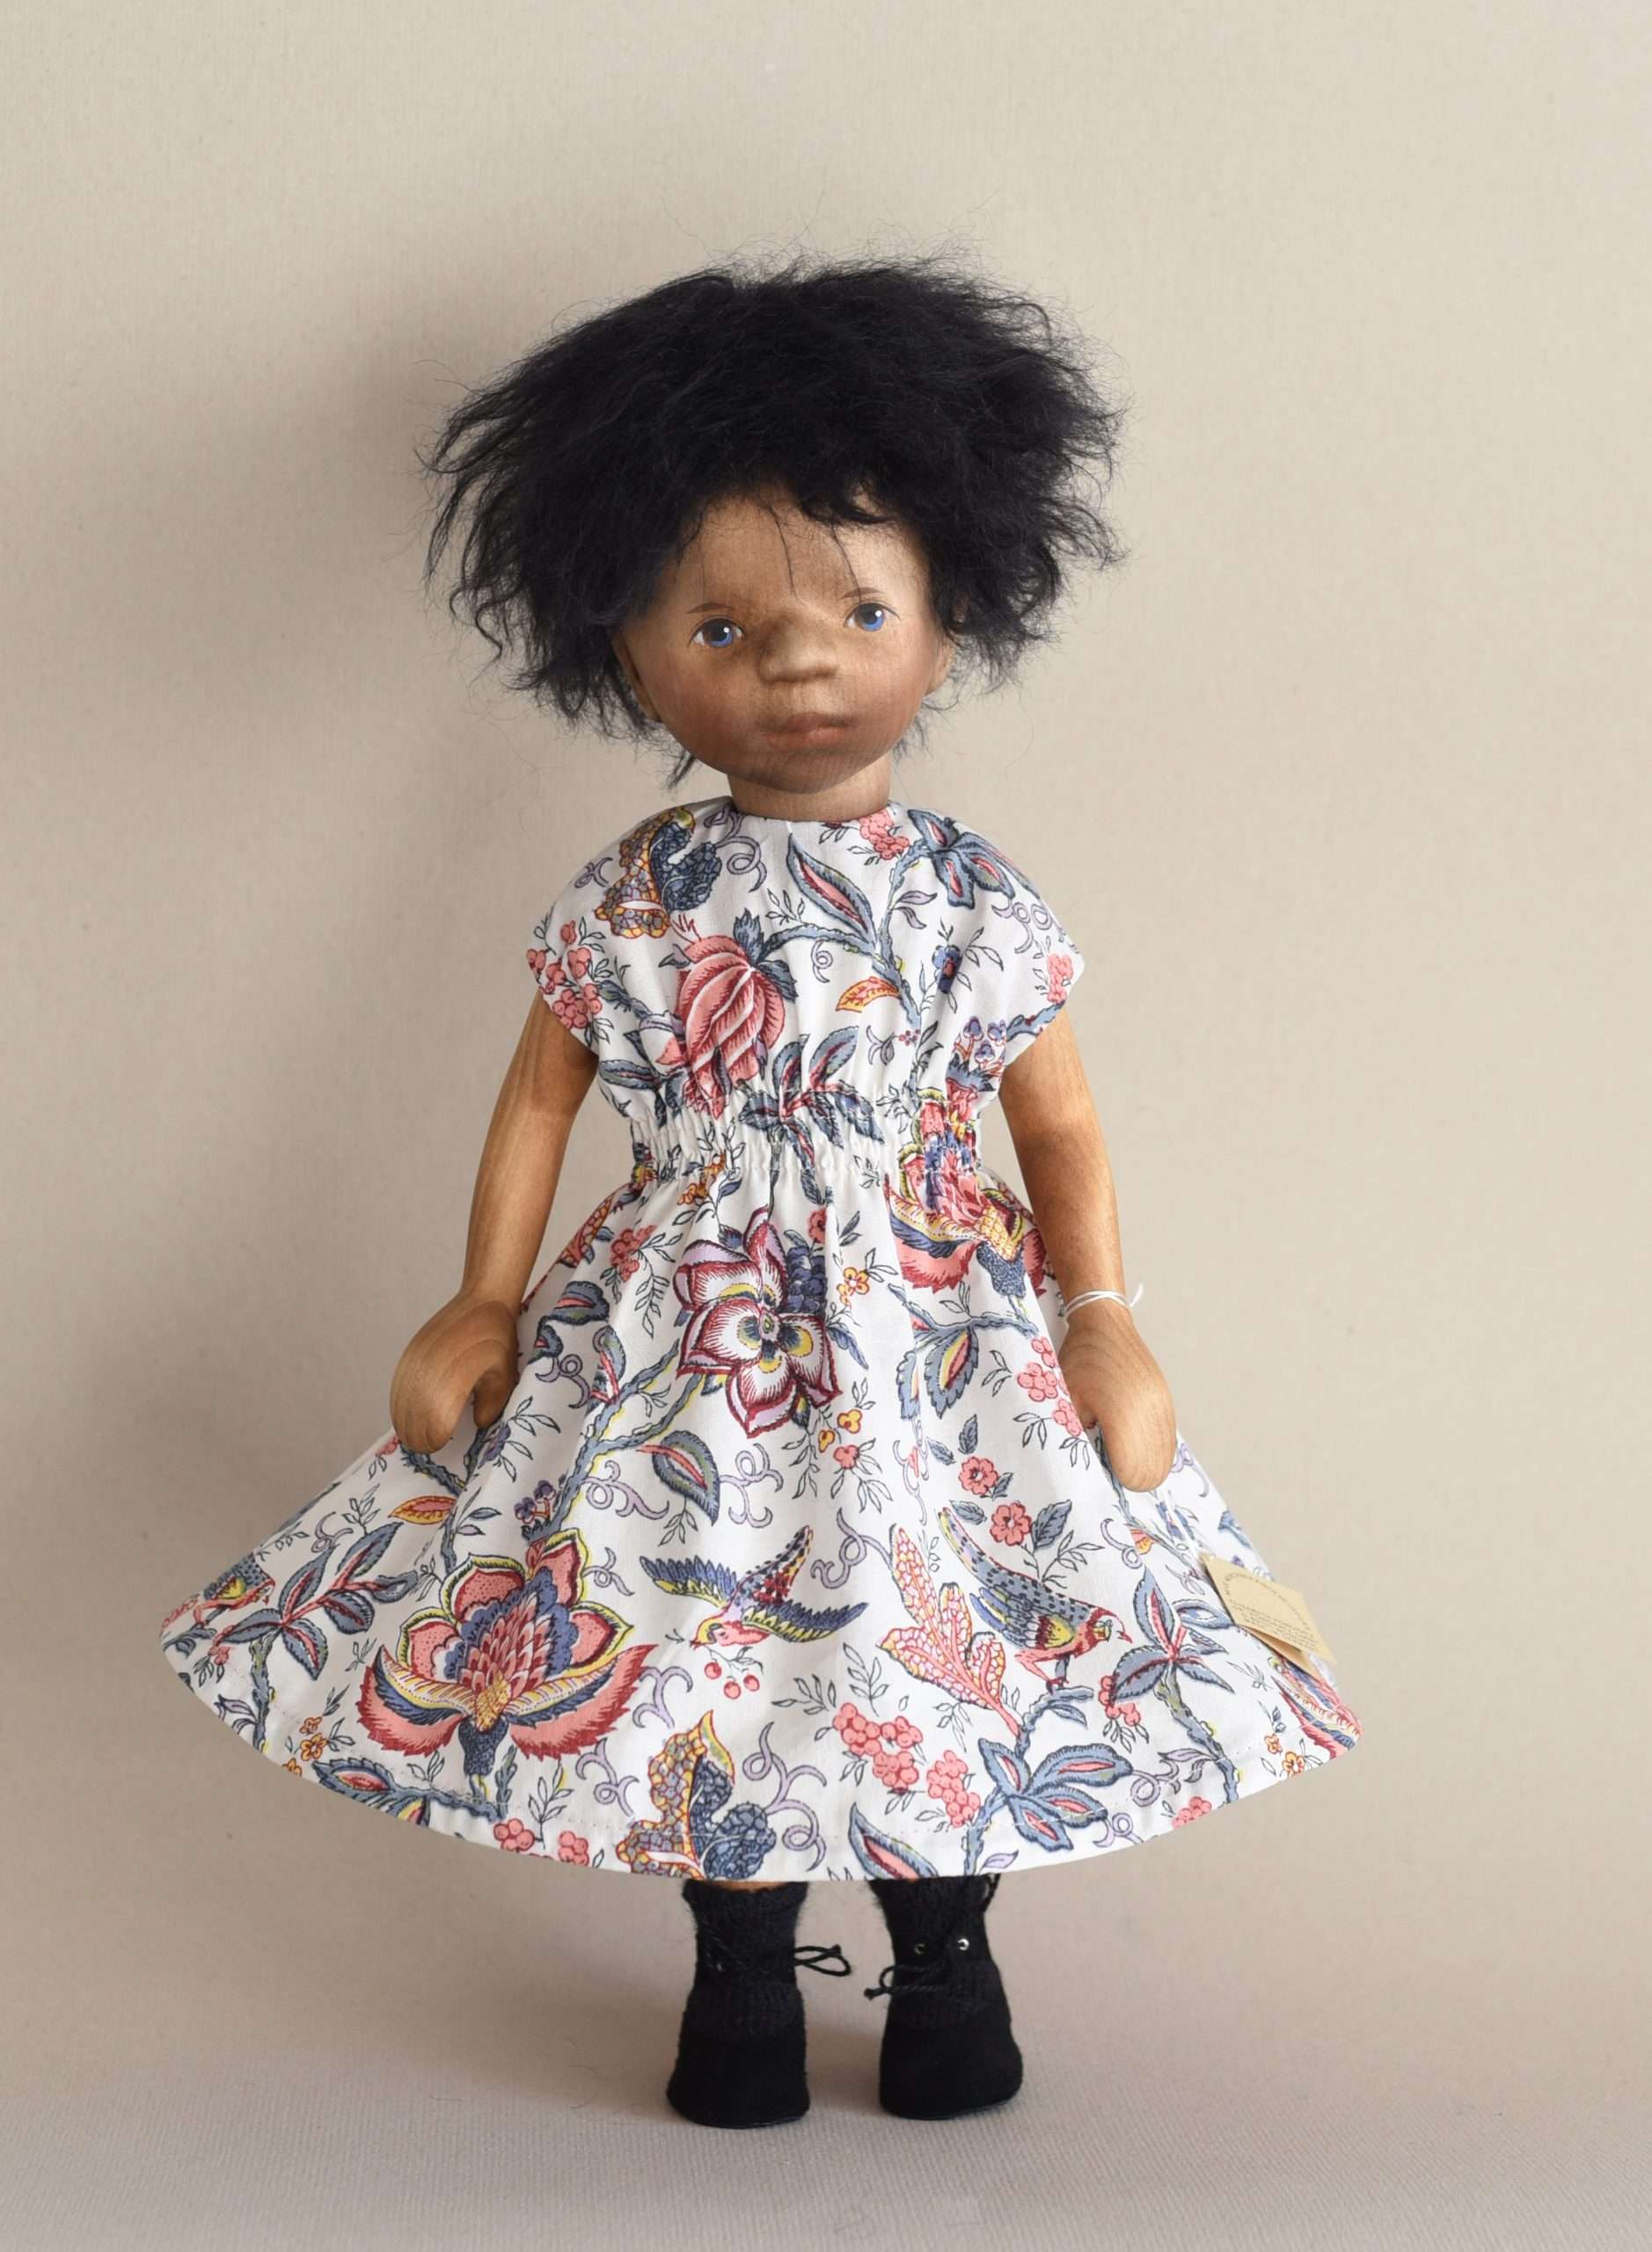 Wooden doll H372e